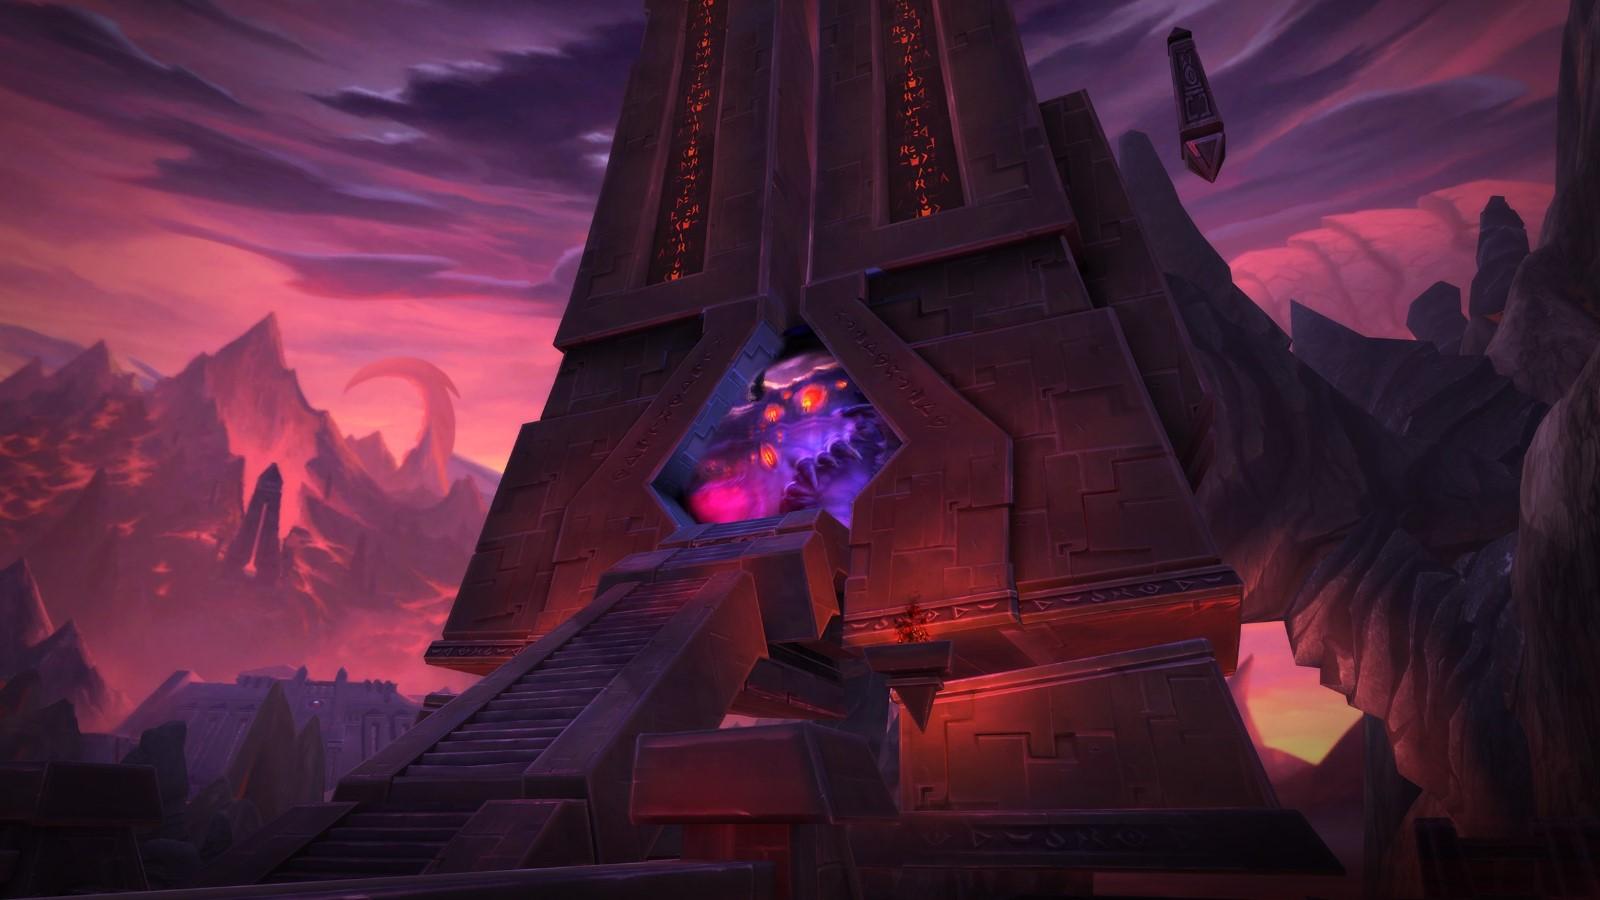 N'zoth waits in the Waking City in WoW